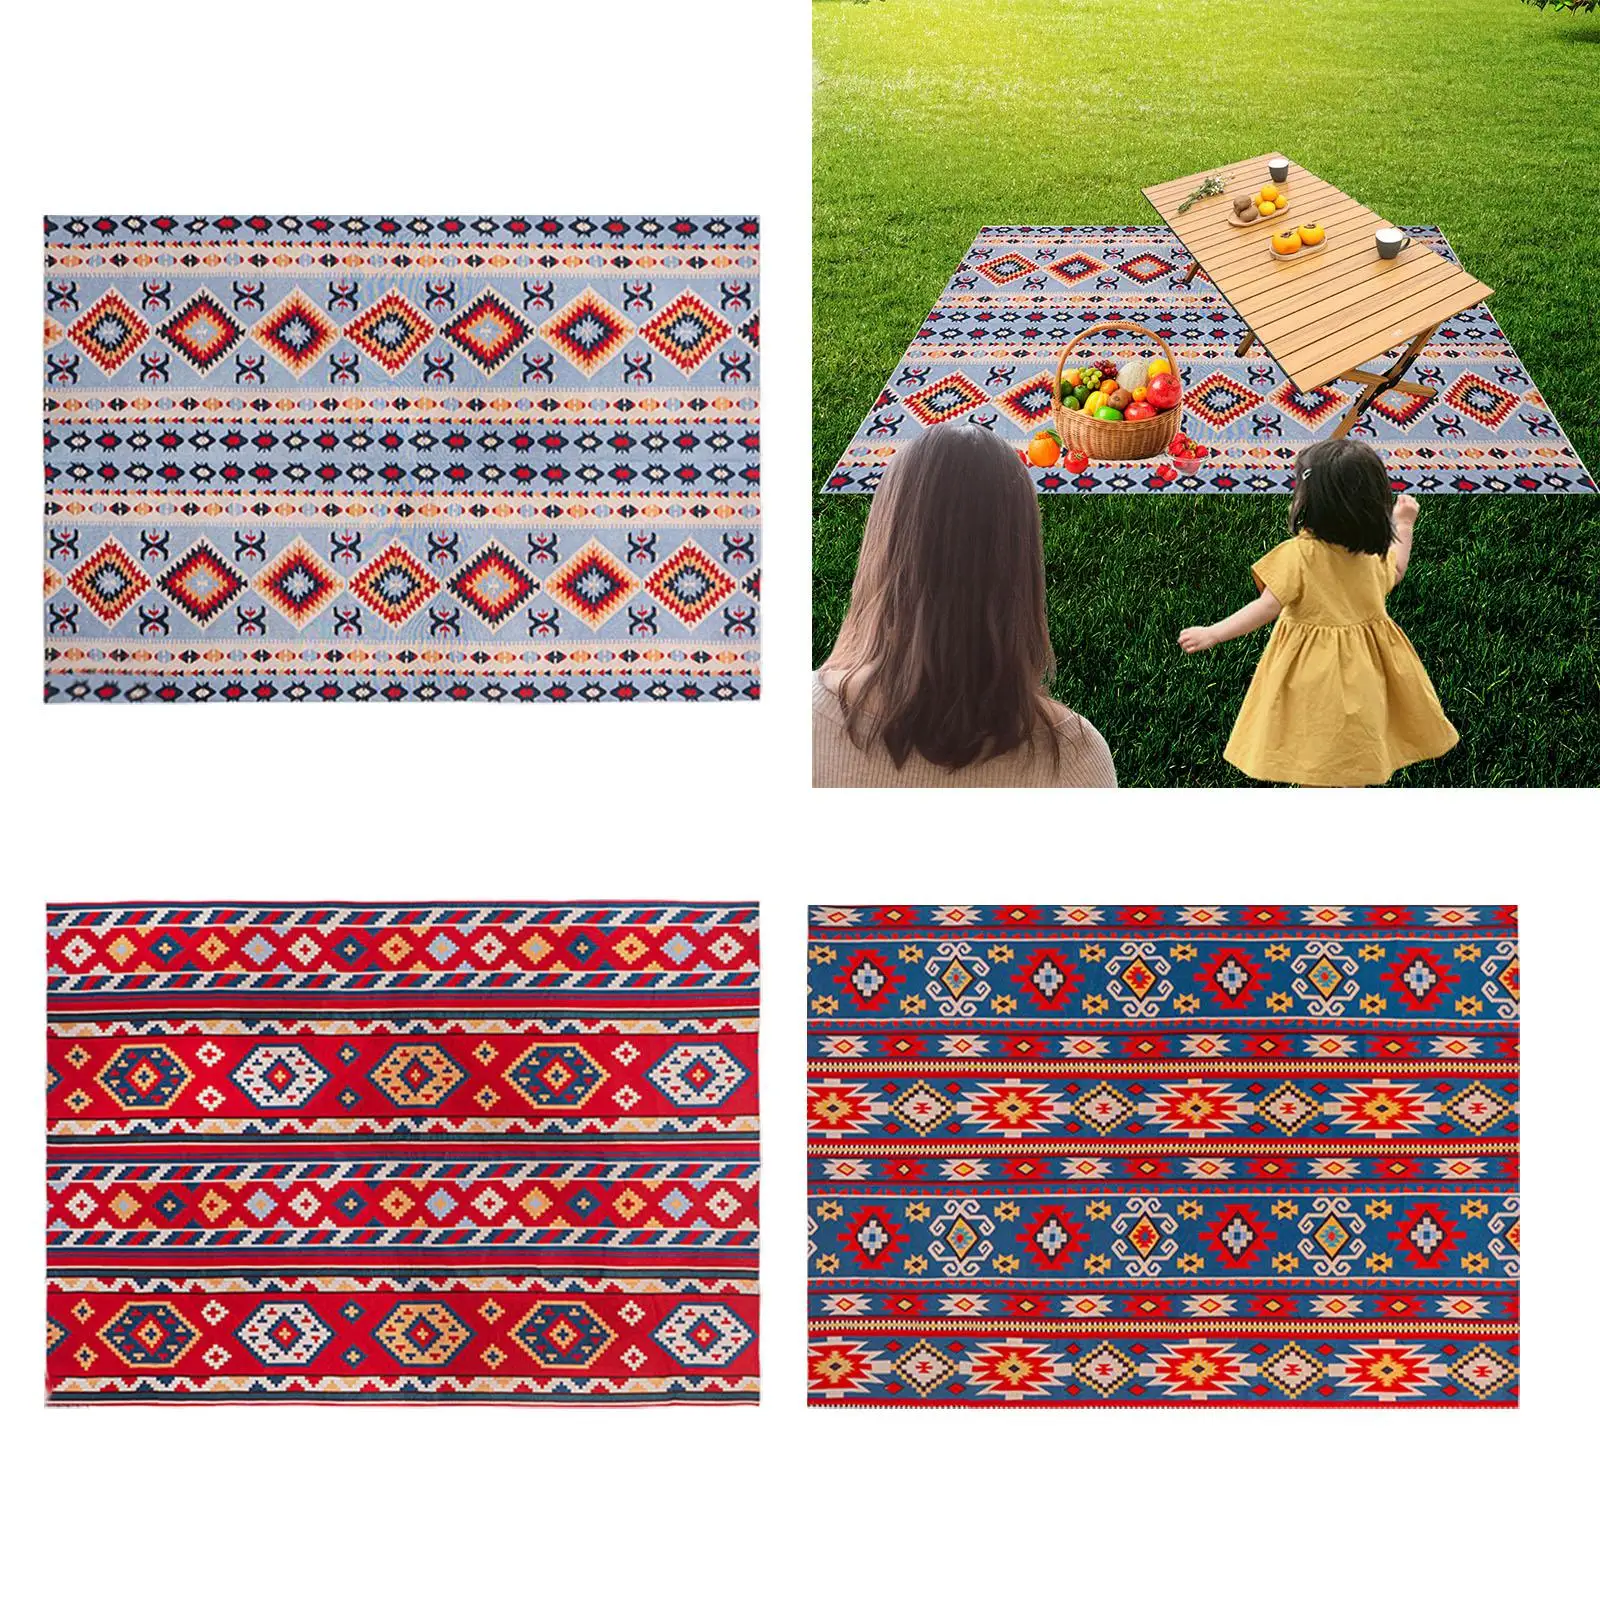 Large Picnic Outdoor Blanket Family Mat Portable Foldable Protective Blanket Mat for Beach Camping Lawn Hiking